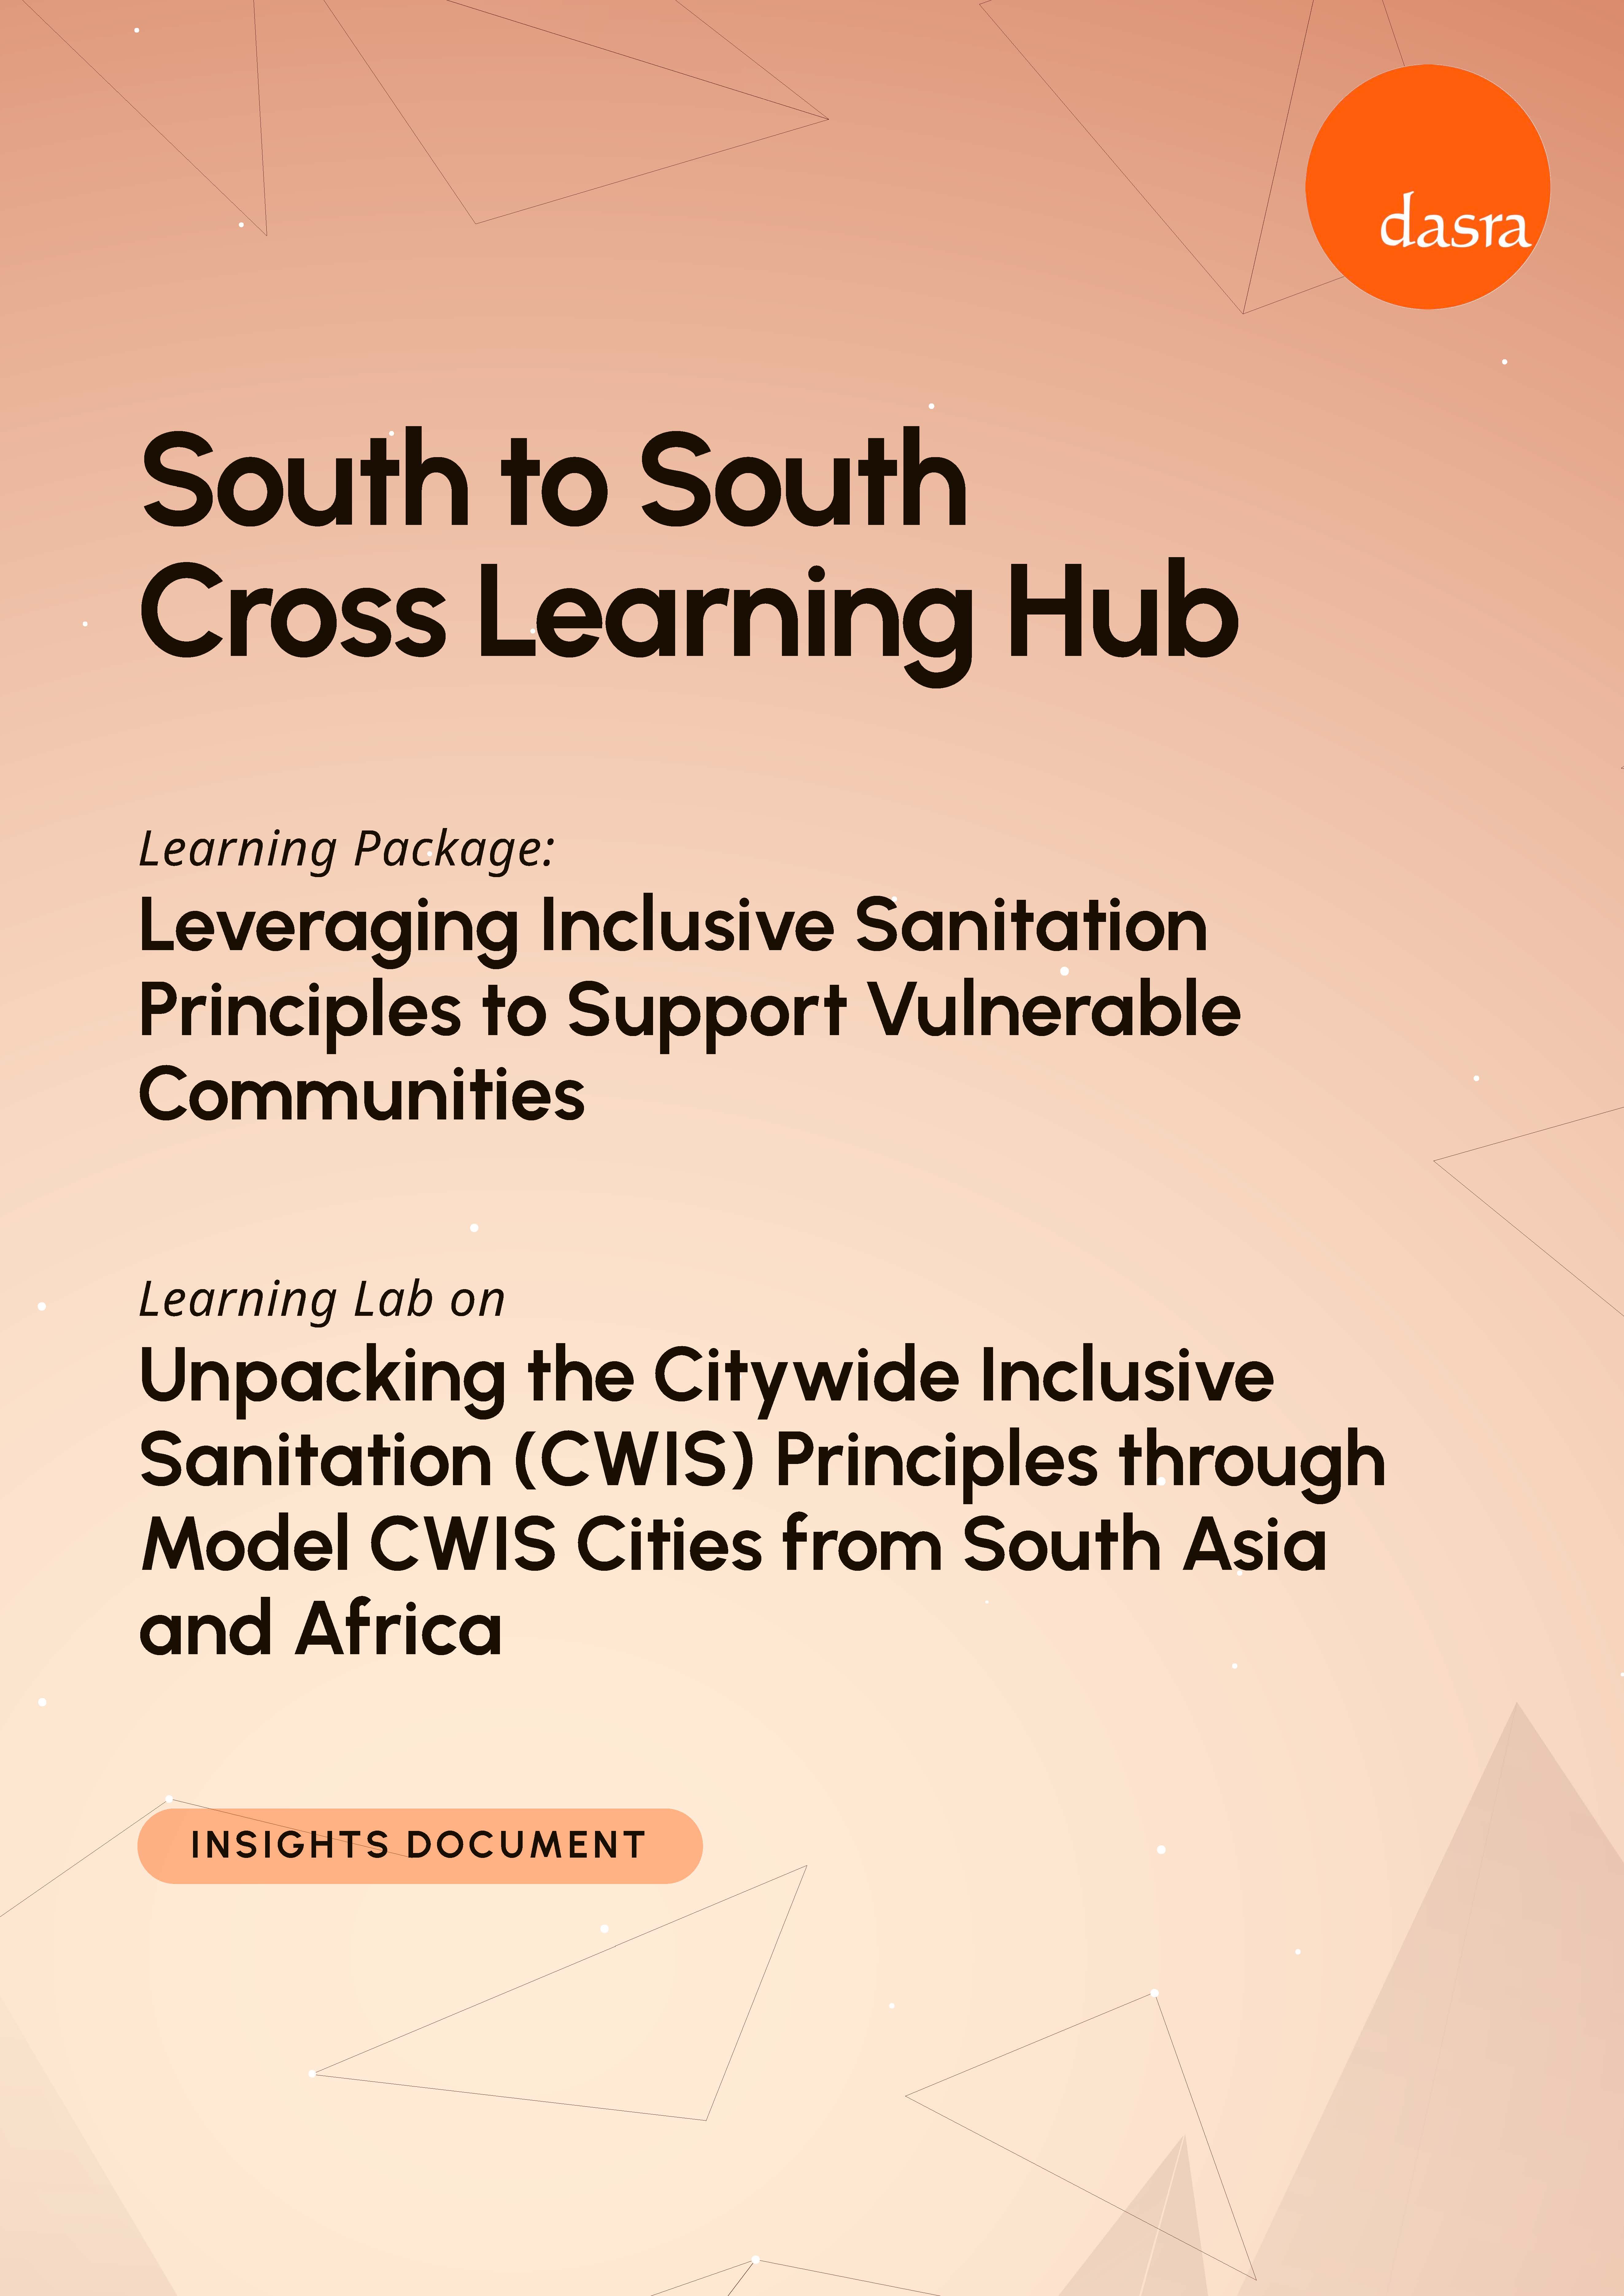 Unpacking the Citywide Inclusive Sanitation (CWIS) Principles through Model CWIS Cities from South Asia and Africa